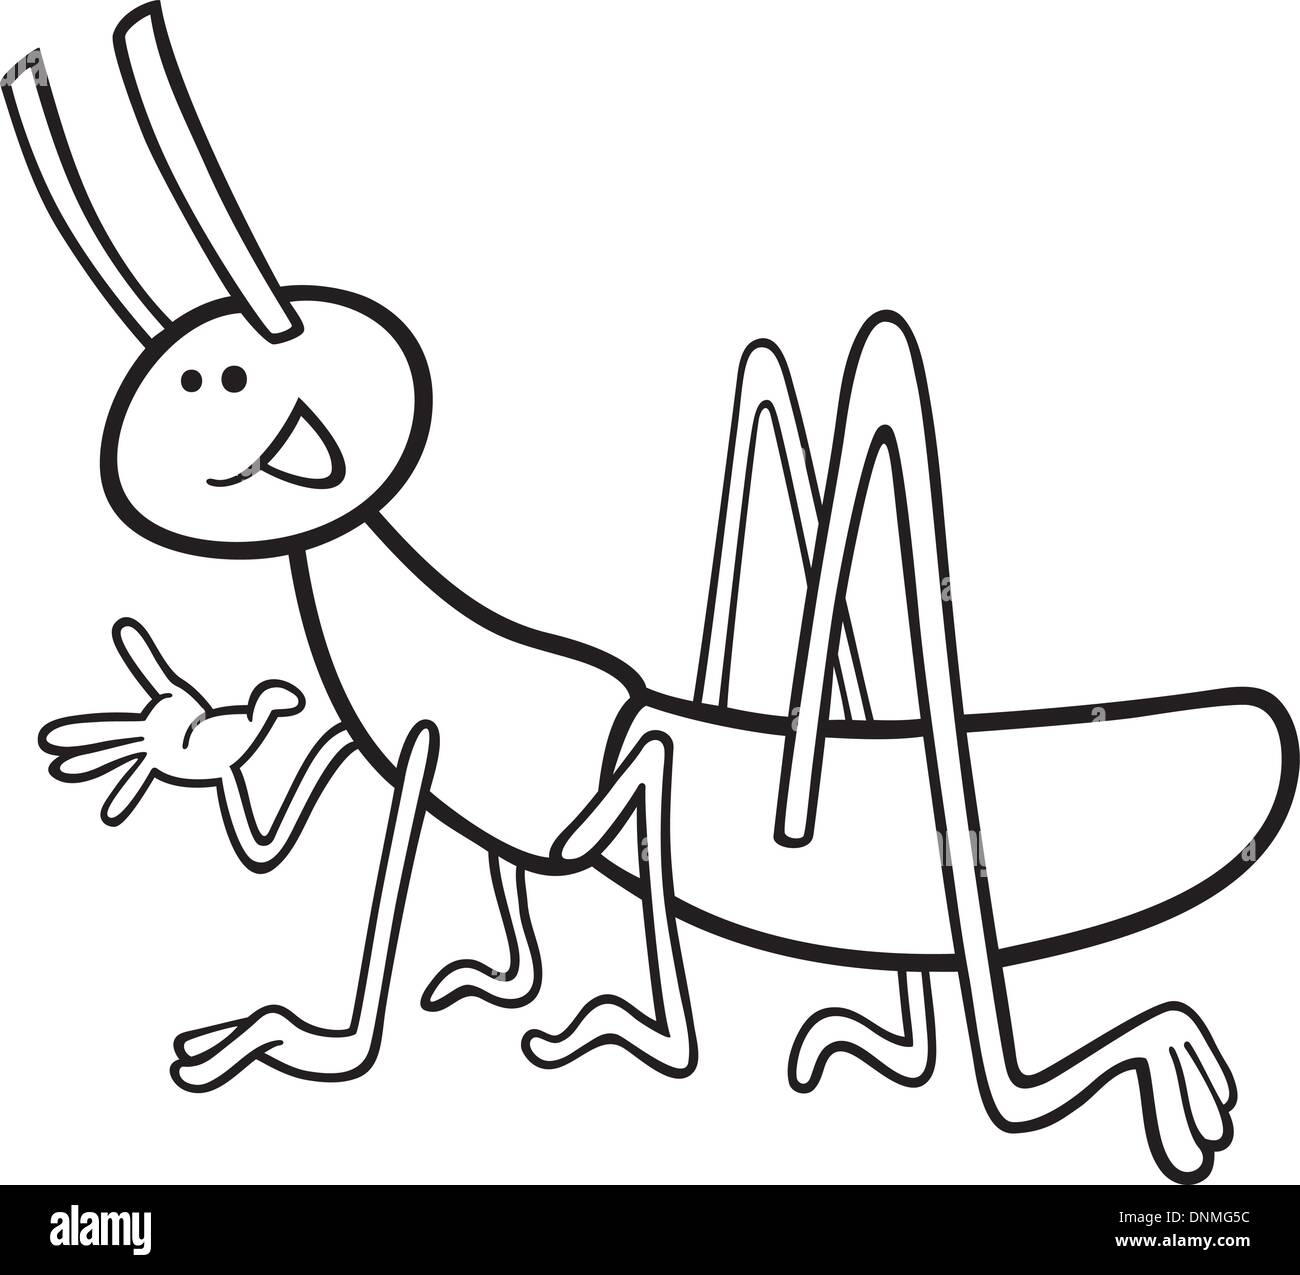 cartoon illustration of funny grasshopper for coloring book Stock Vector